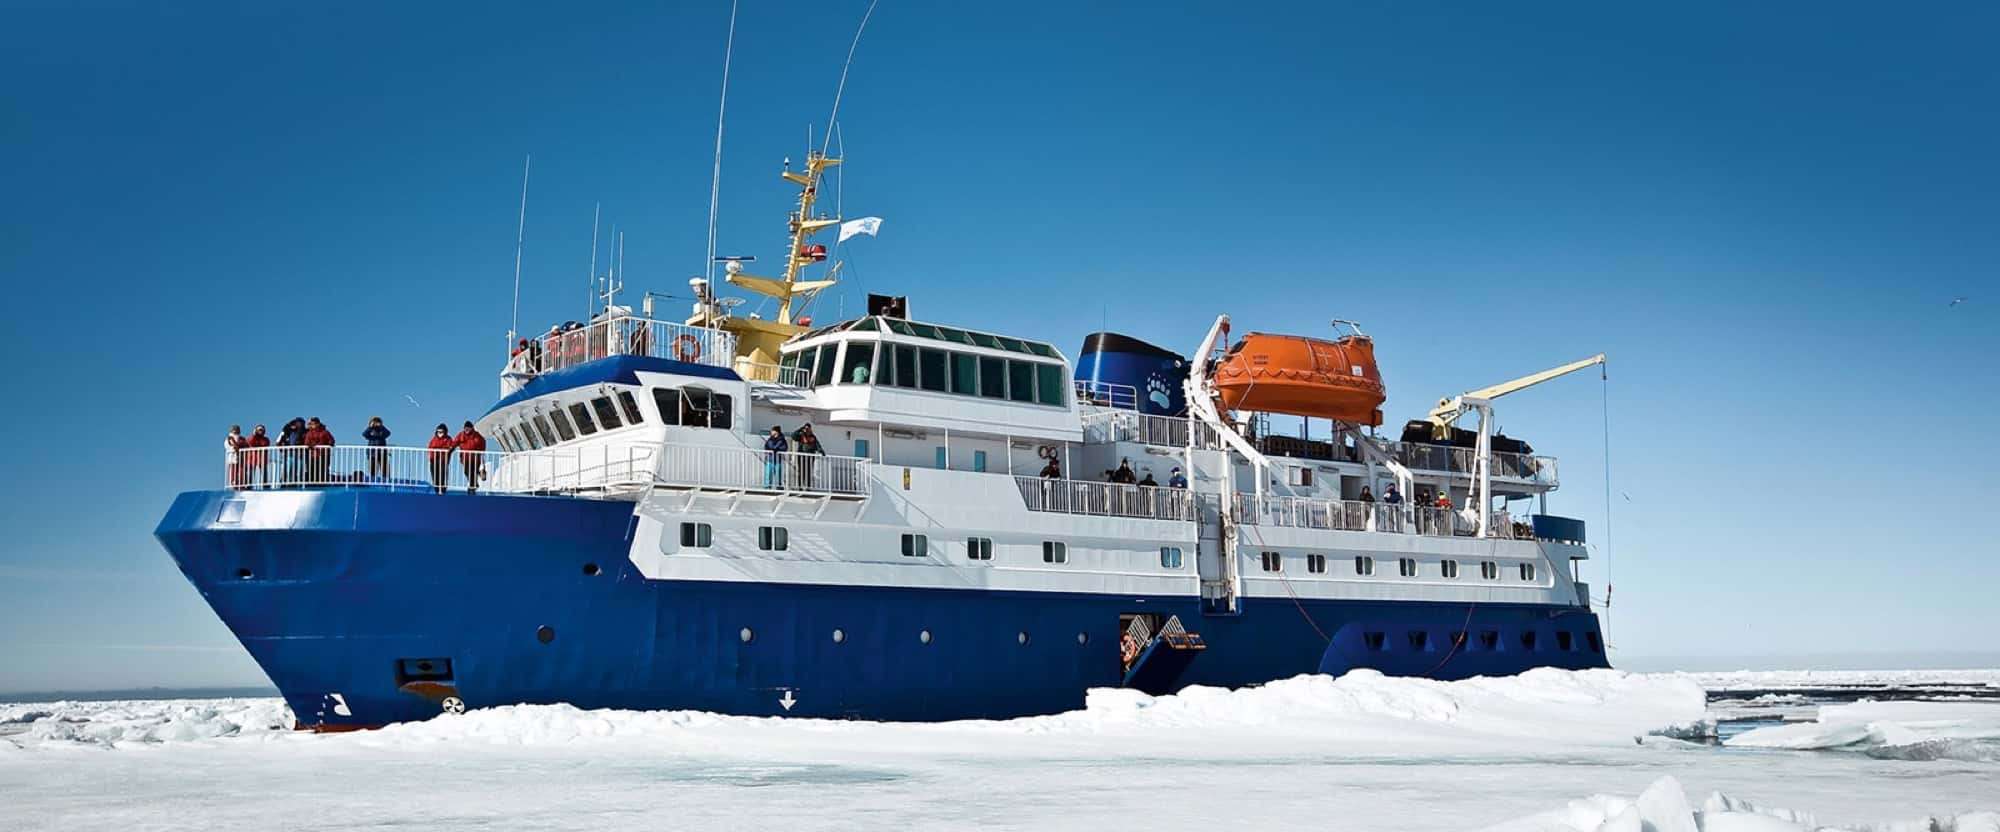 A boutique and cherished expedition ship – Norwegian Adventure Company